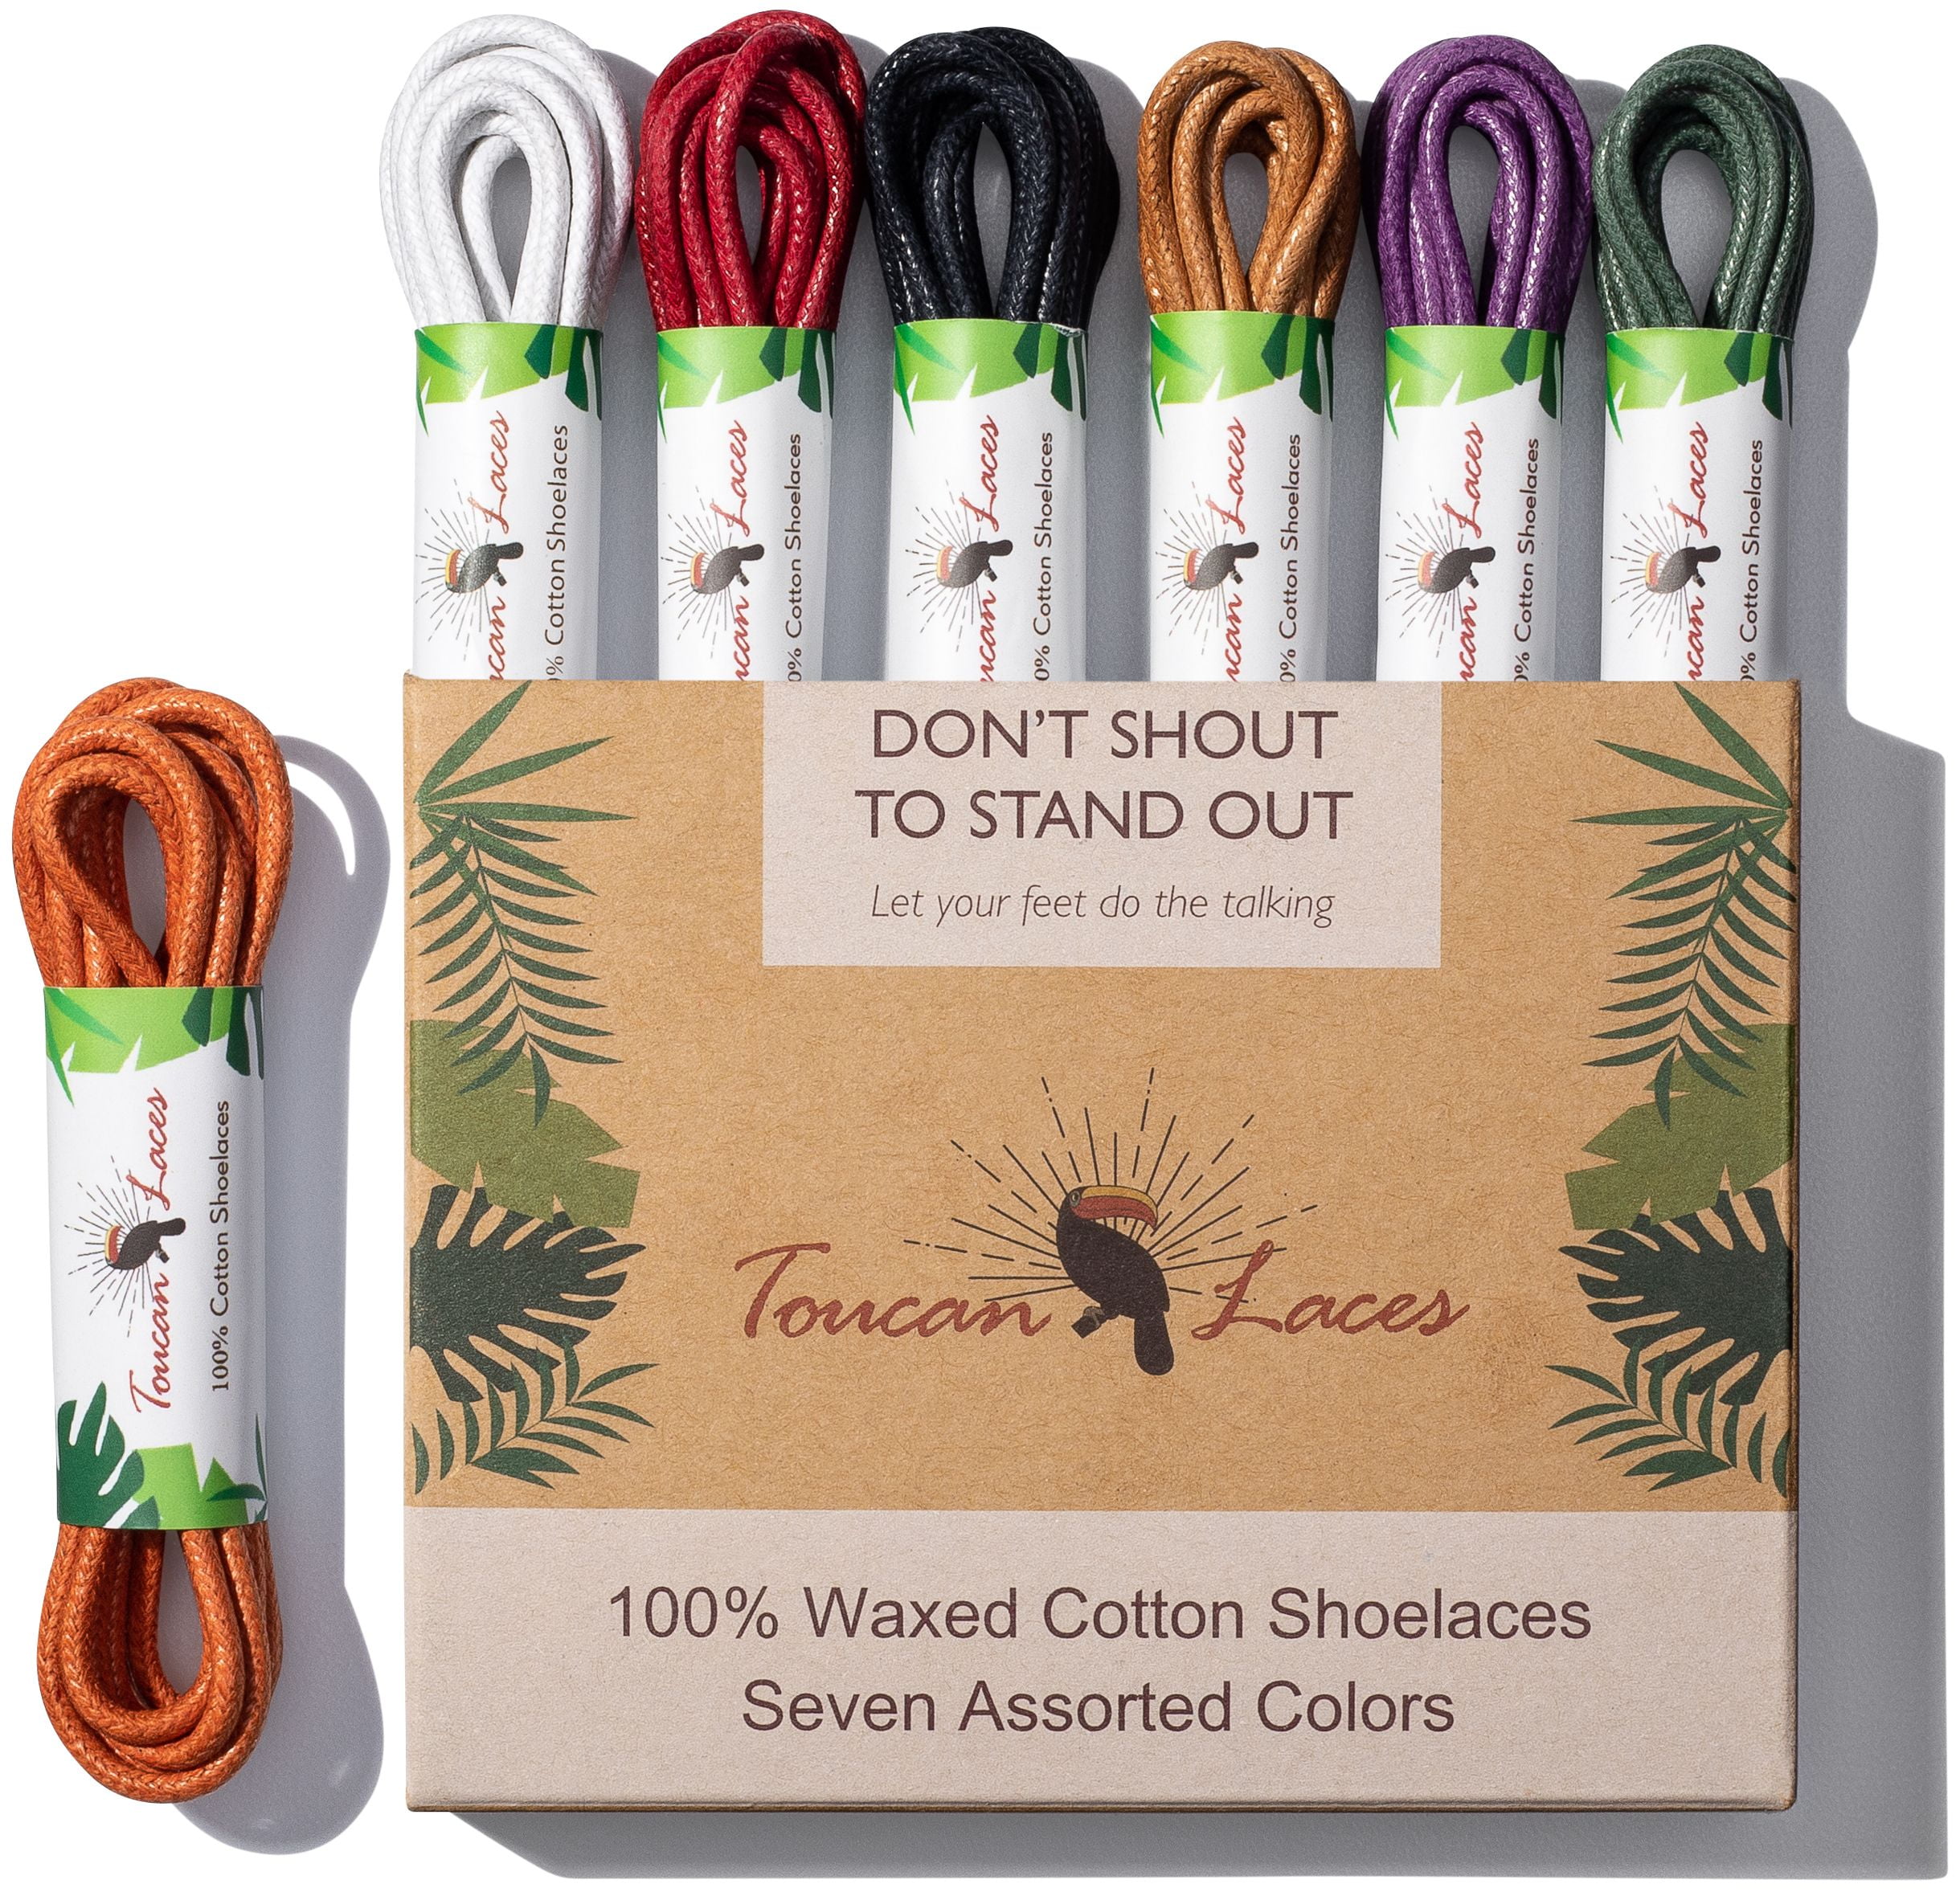 FLAT Premium Waxed Cotton Shoelaces Sneakers Colored Shoe Laces Boot Strings 